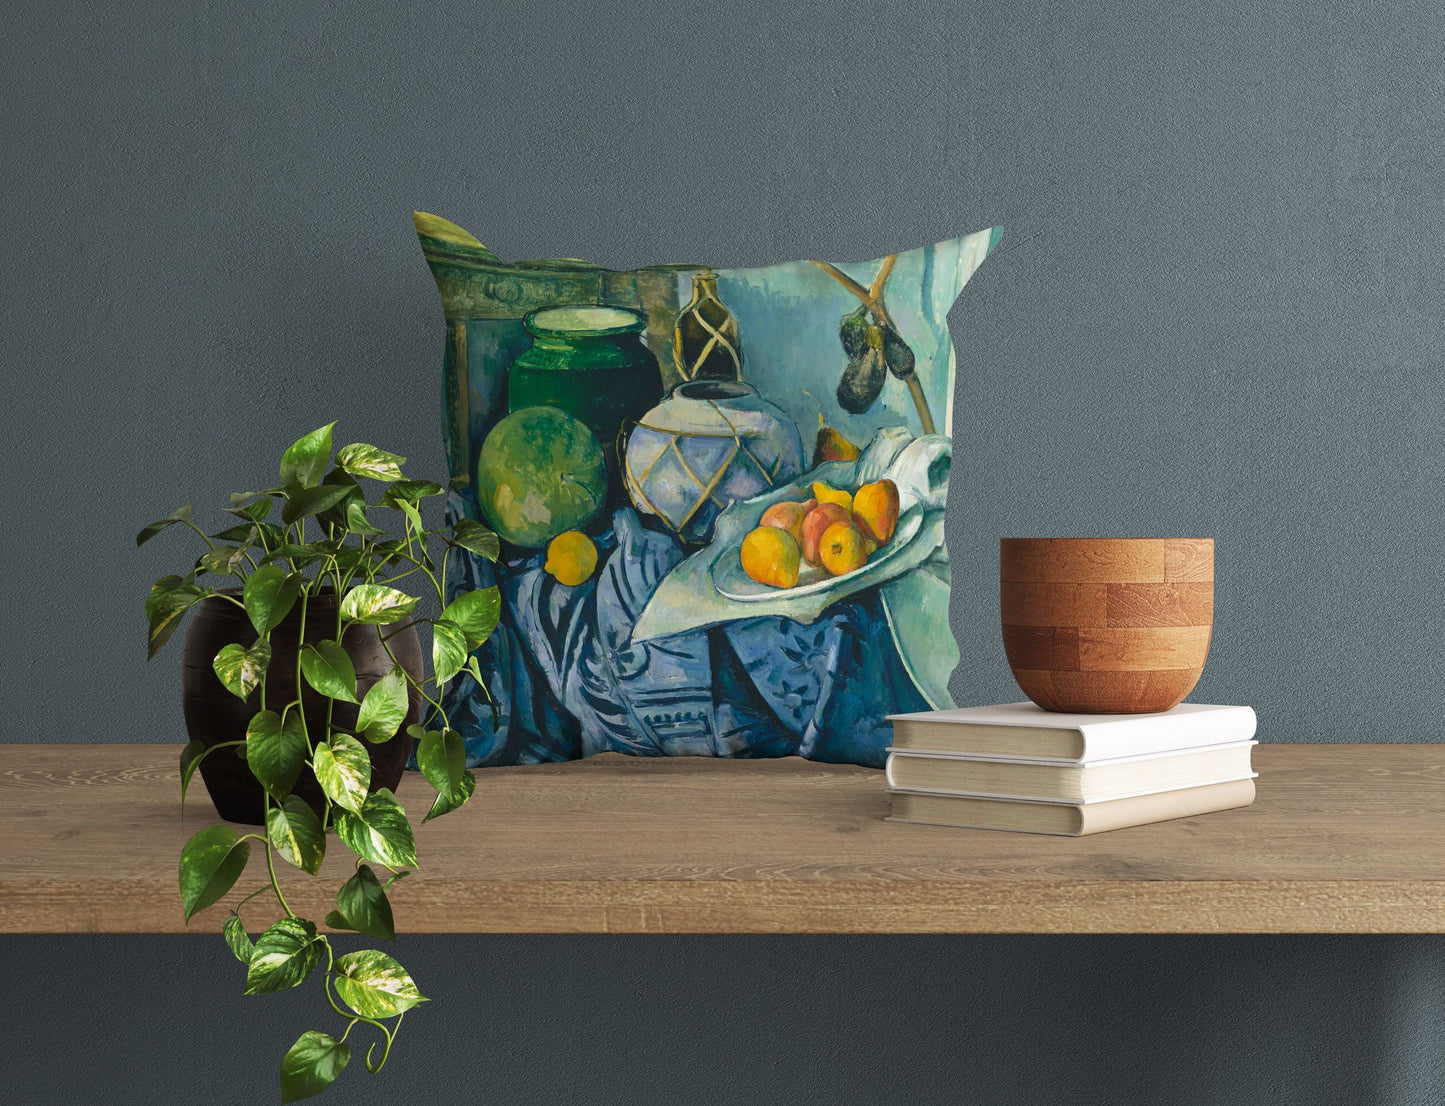 Paul Cezanne Famous Painting, Toss Pillow, Abstract Throw Pillow Cover, Blue And Green, Post-Impressionist Art, 22X22 Pillow Cover